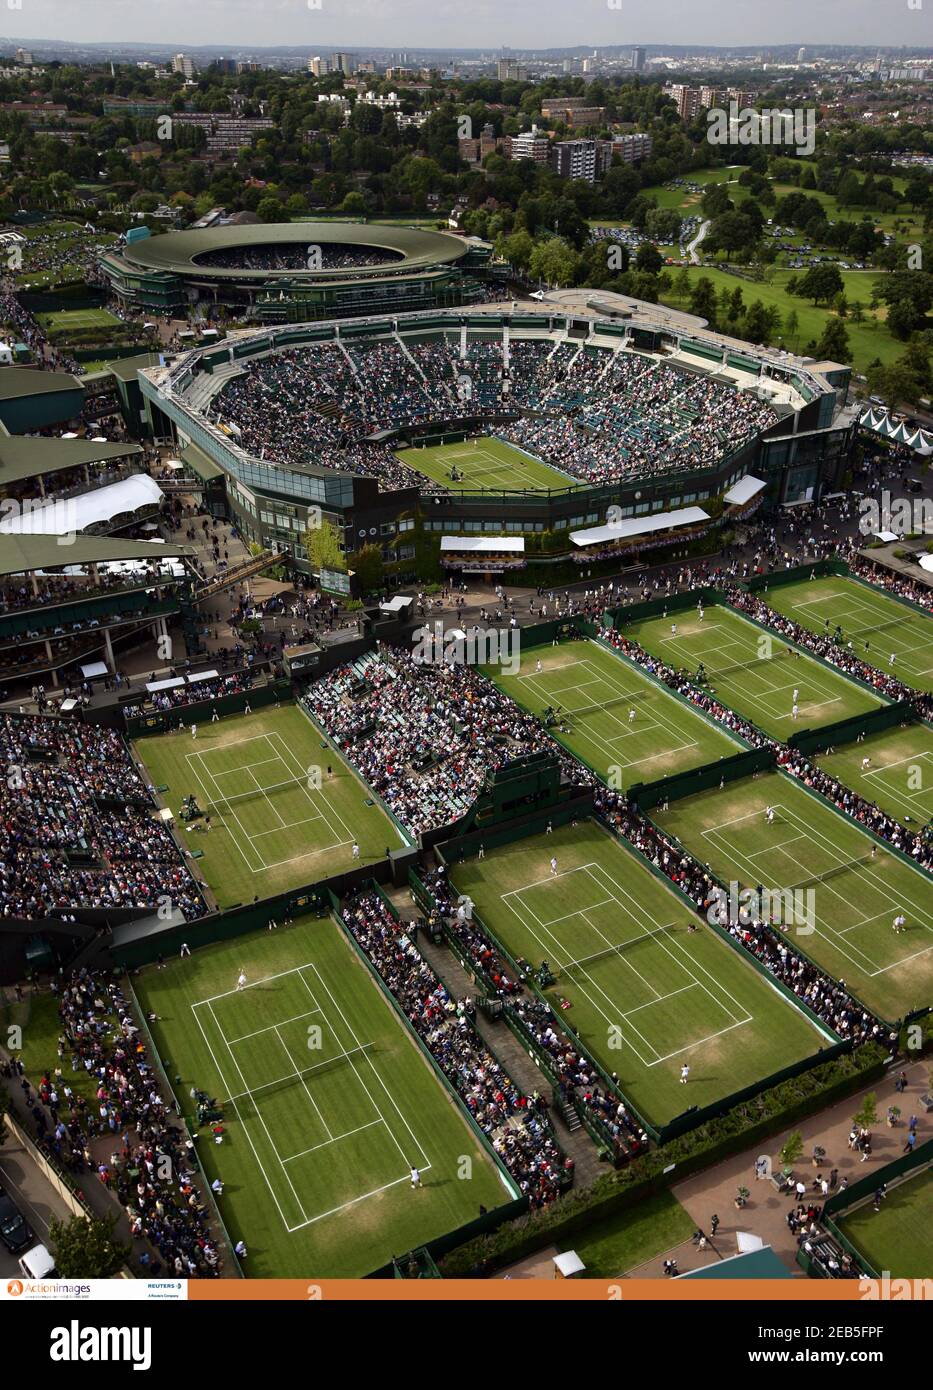 Tennis - Wimbledon - All England Lawn Tennis & Croquet Club, Wimbledon,  England - 29/6/07 General view of Wimbledon Mandatory Credit: Action Images  / Glyn Kirk / Pool Pic Livepic Stock Photo - Alamy